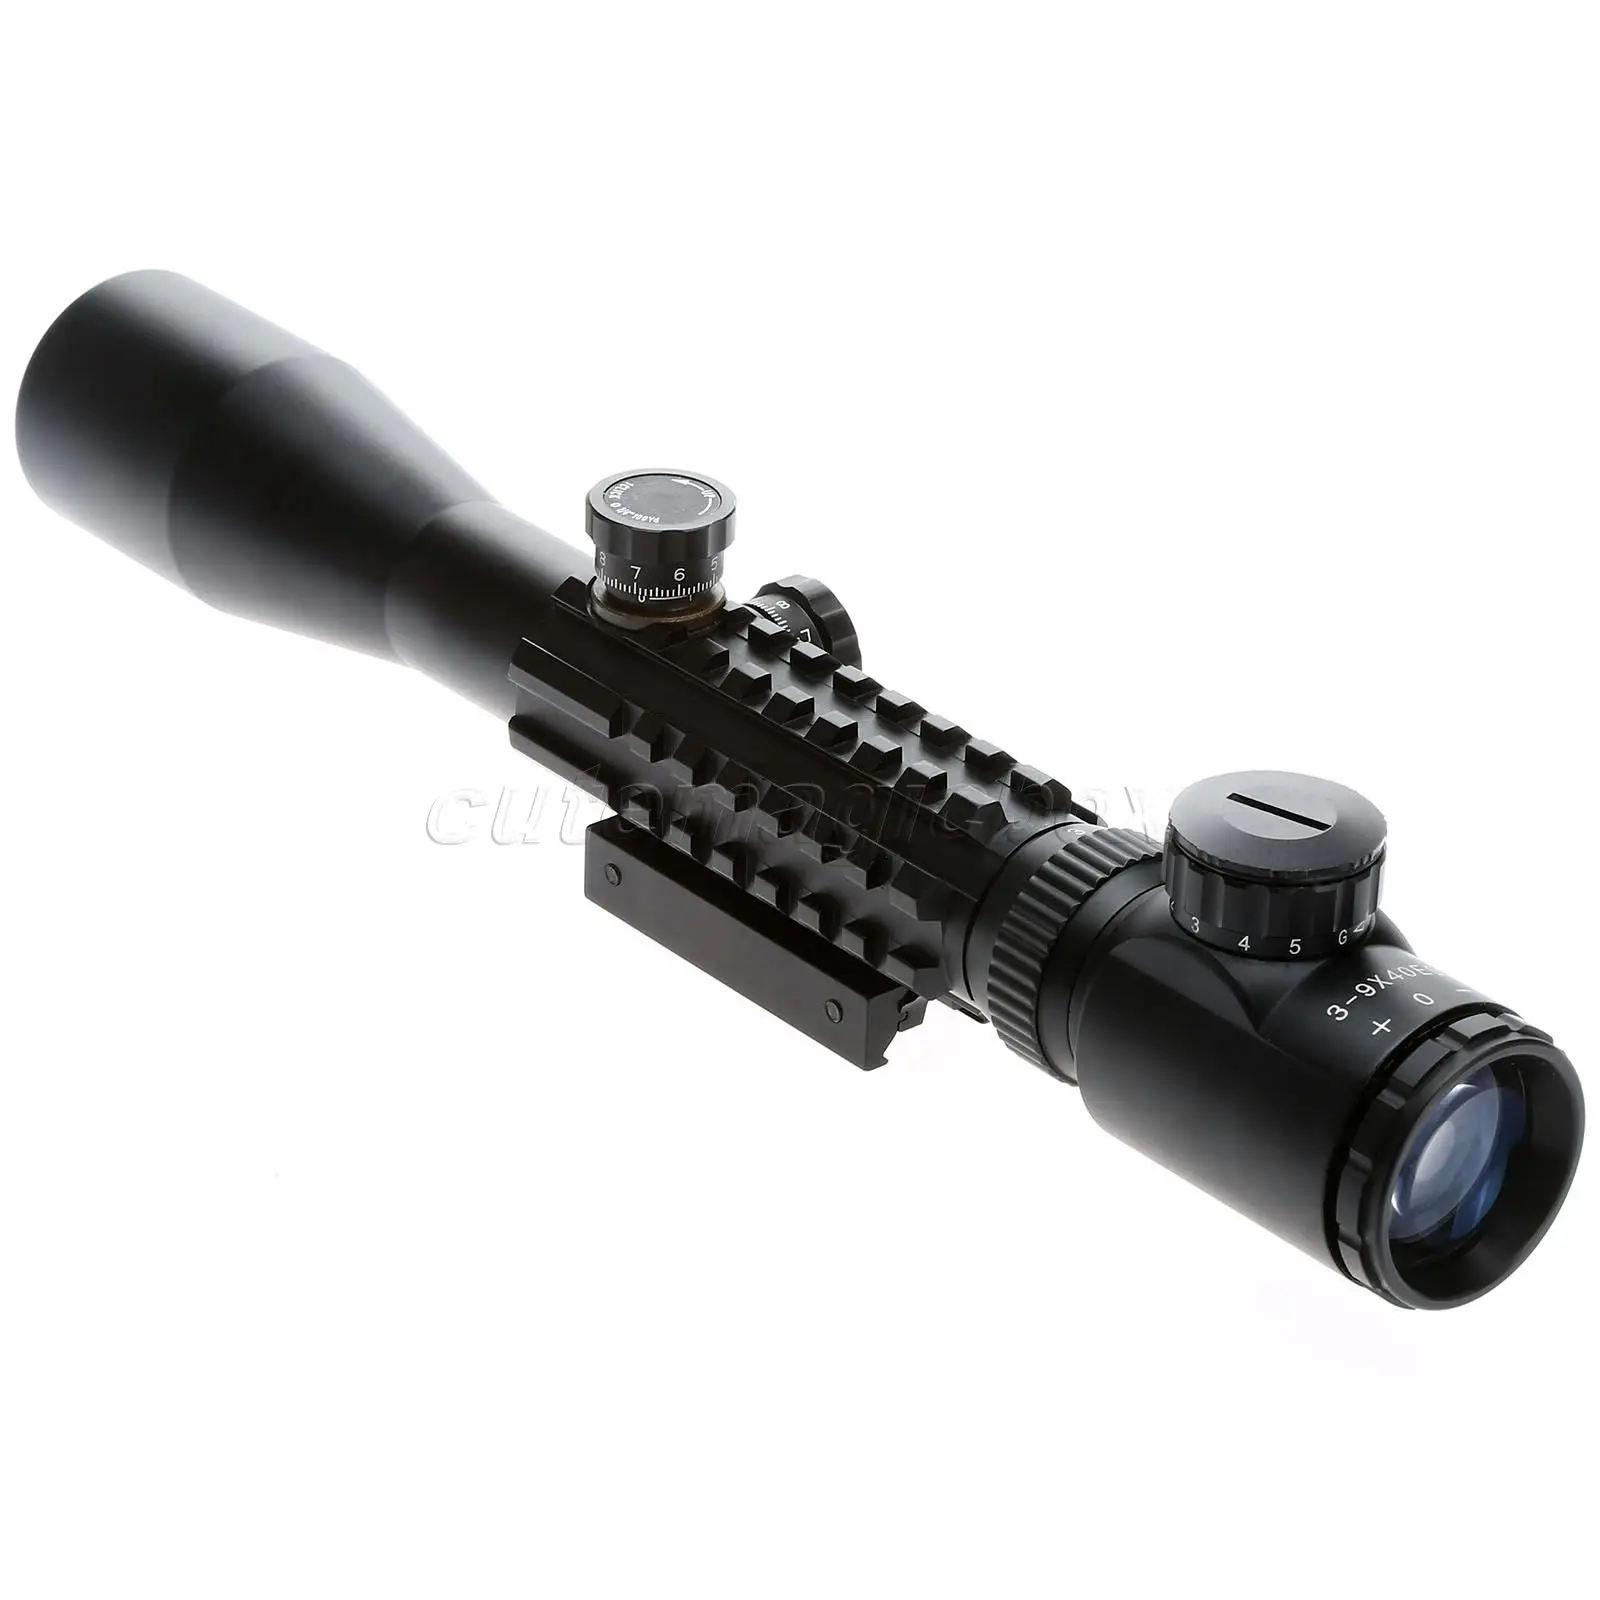 Hunting 3-9X40 Optics Illuminated Tactical Rifle Scope&Holographic Dot Sight Riflescope with Red Laser Outdoor Reticle 20mm Rail